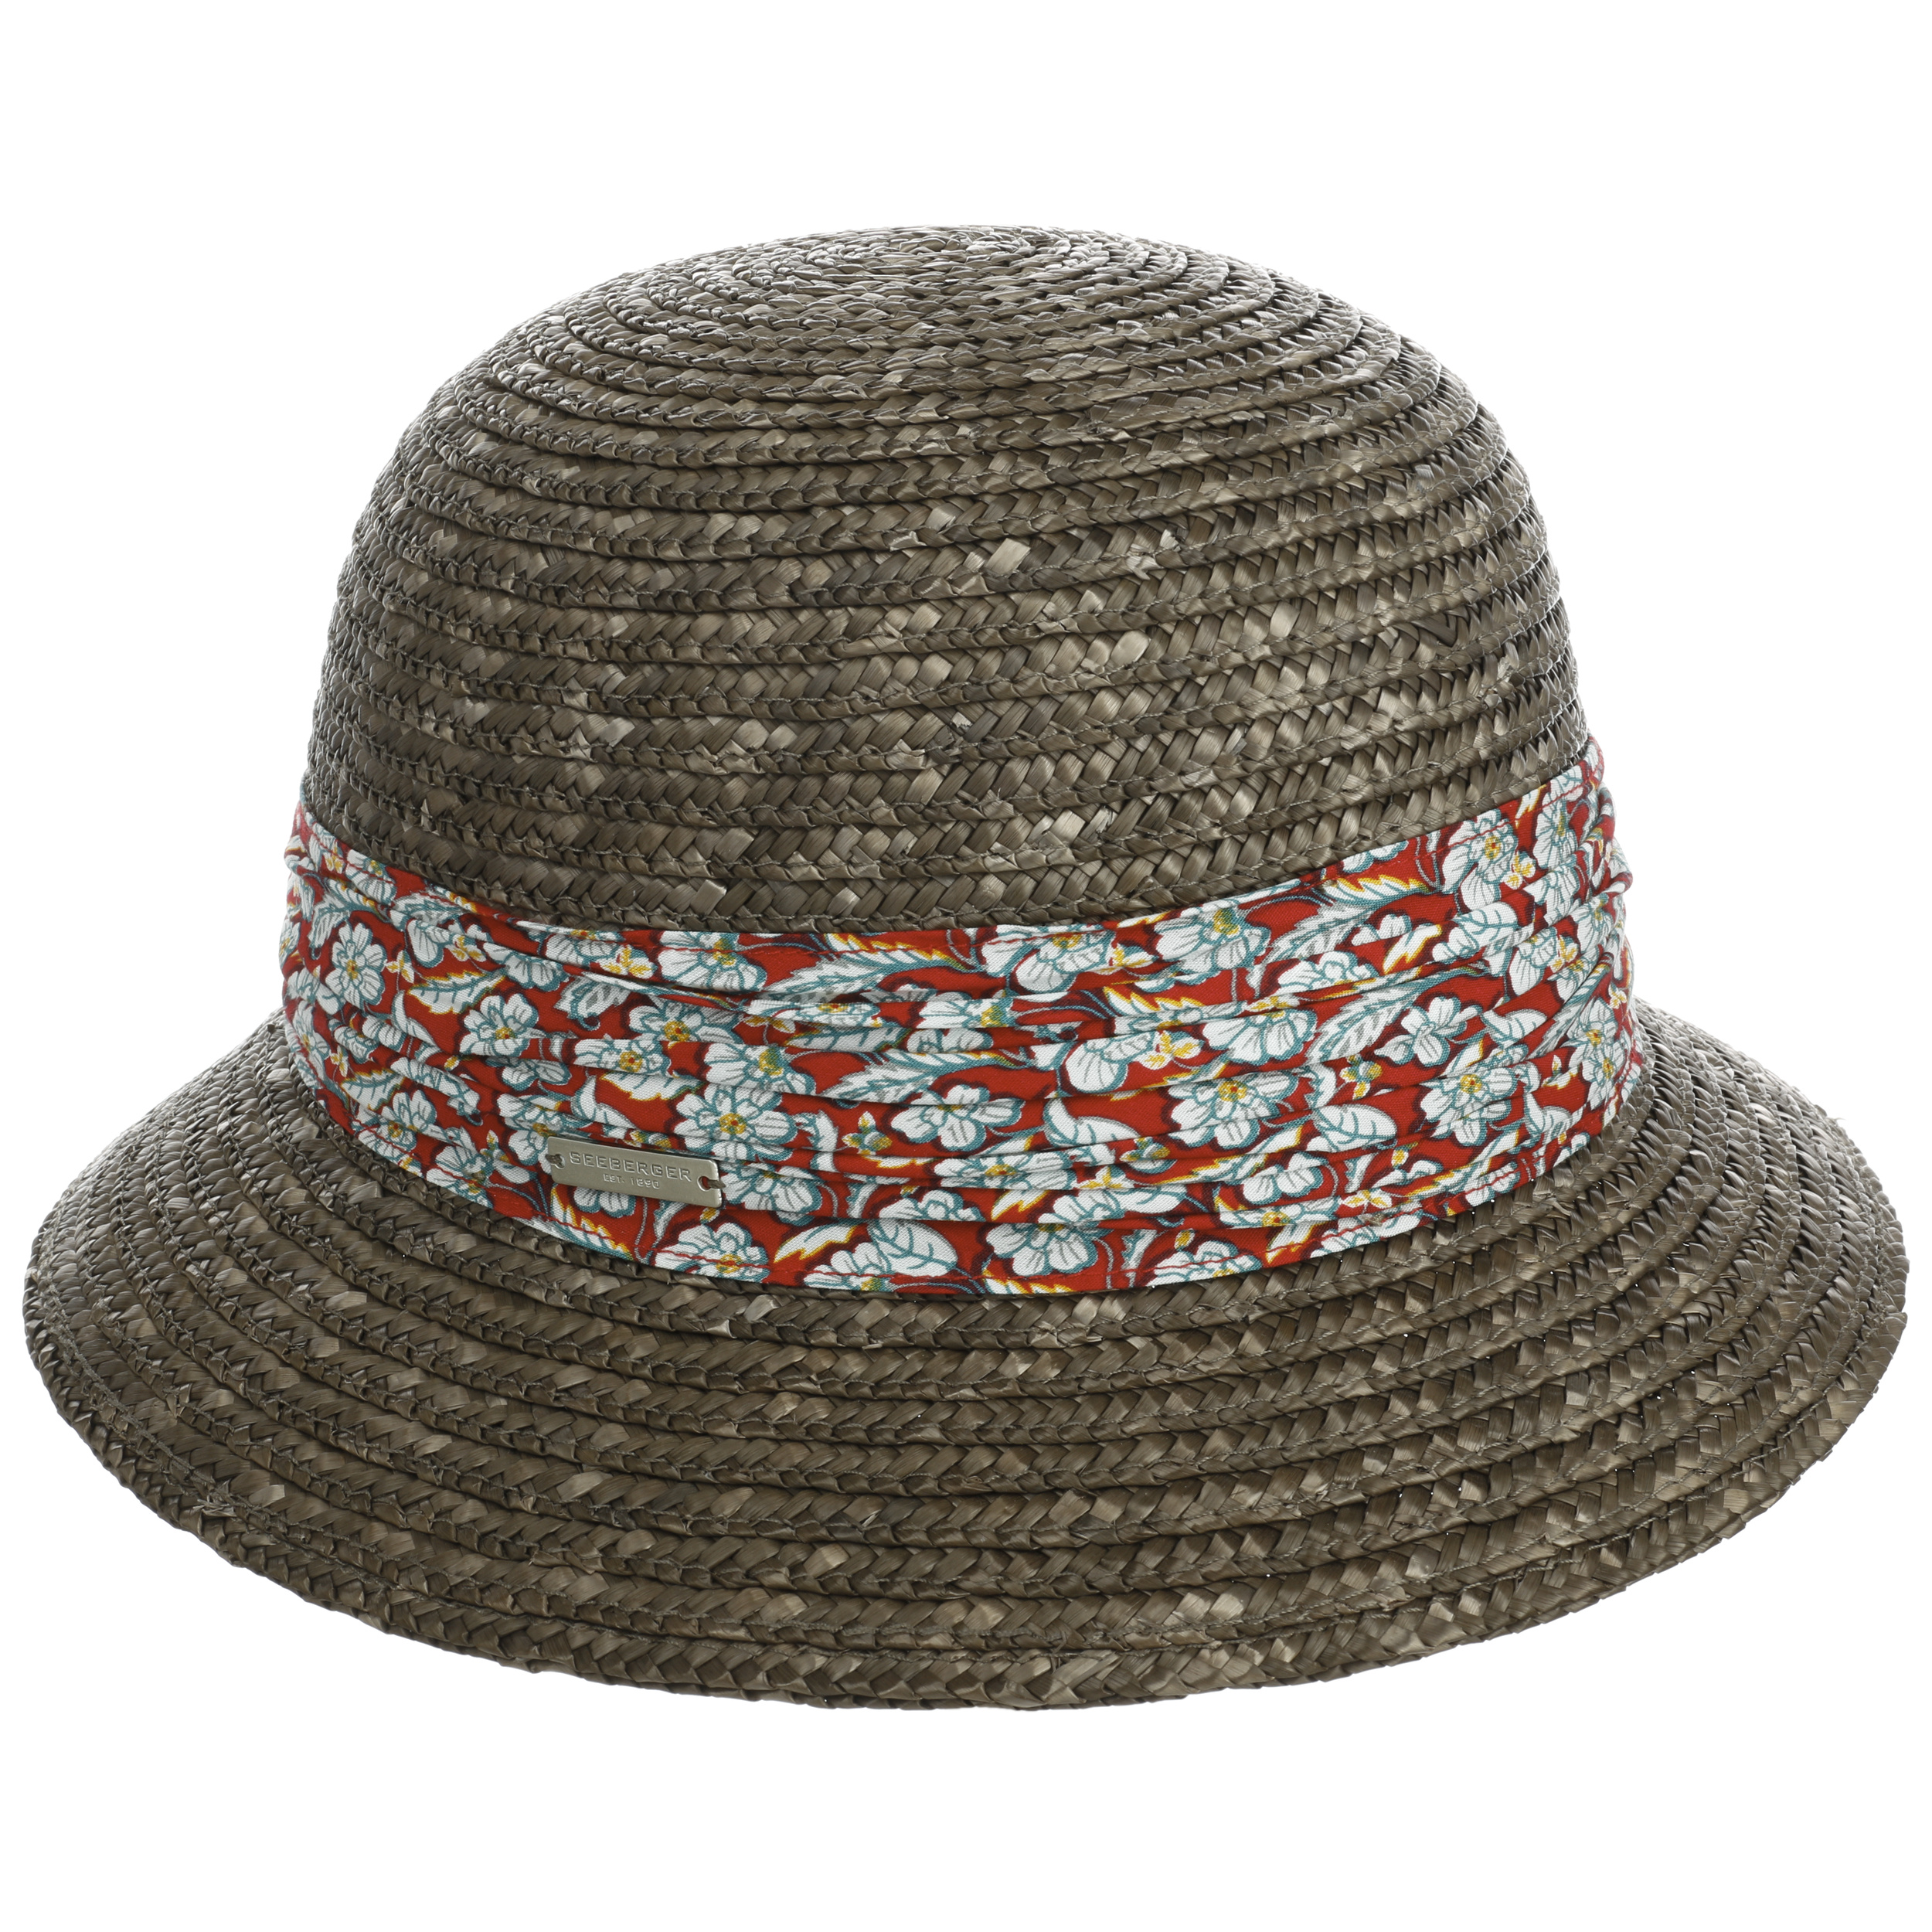 Mariva Flower Braided Hat by Seeberger - 53,95